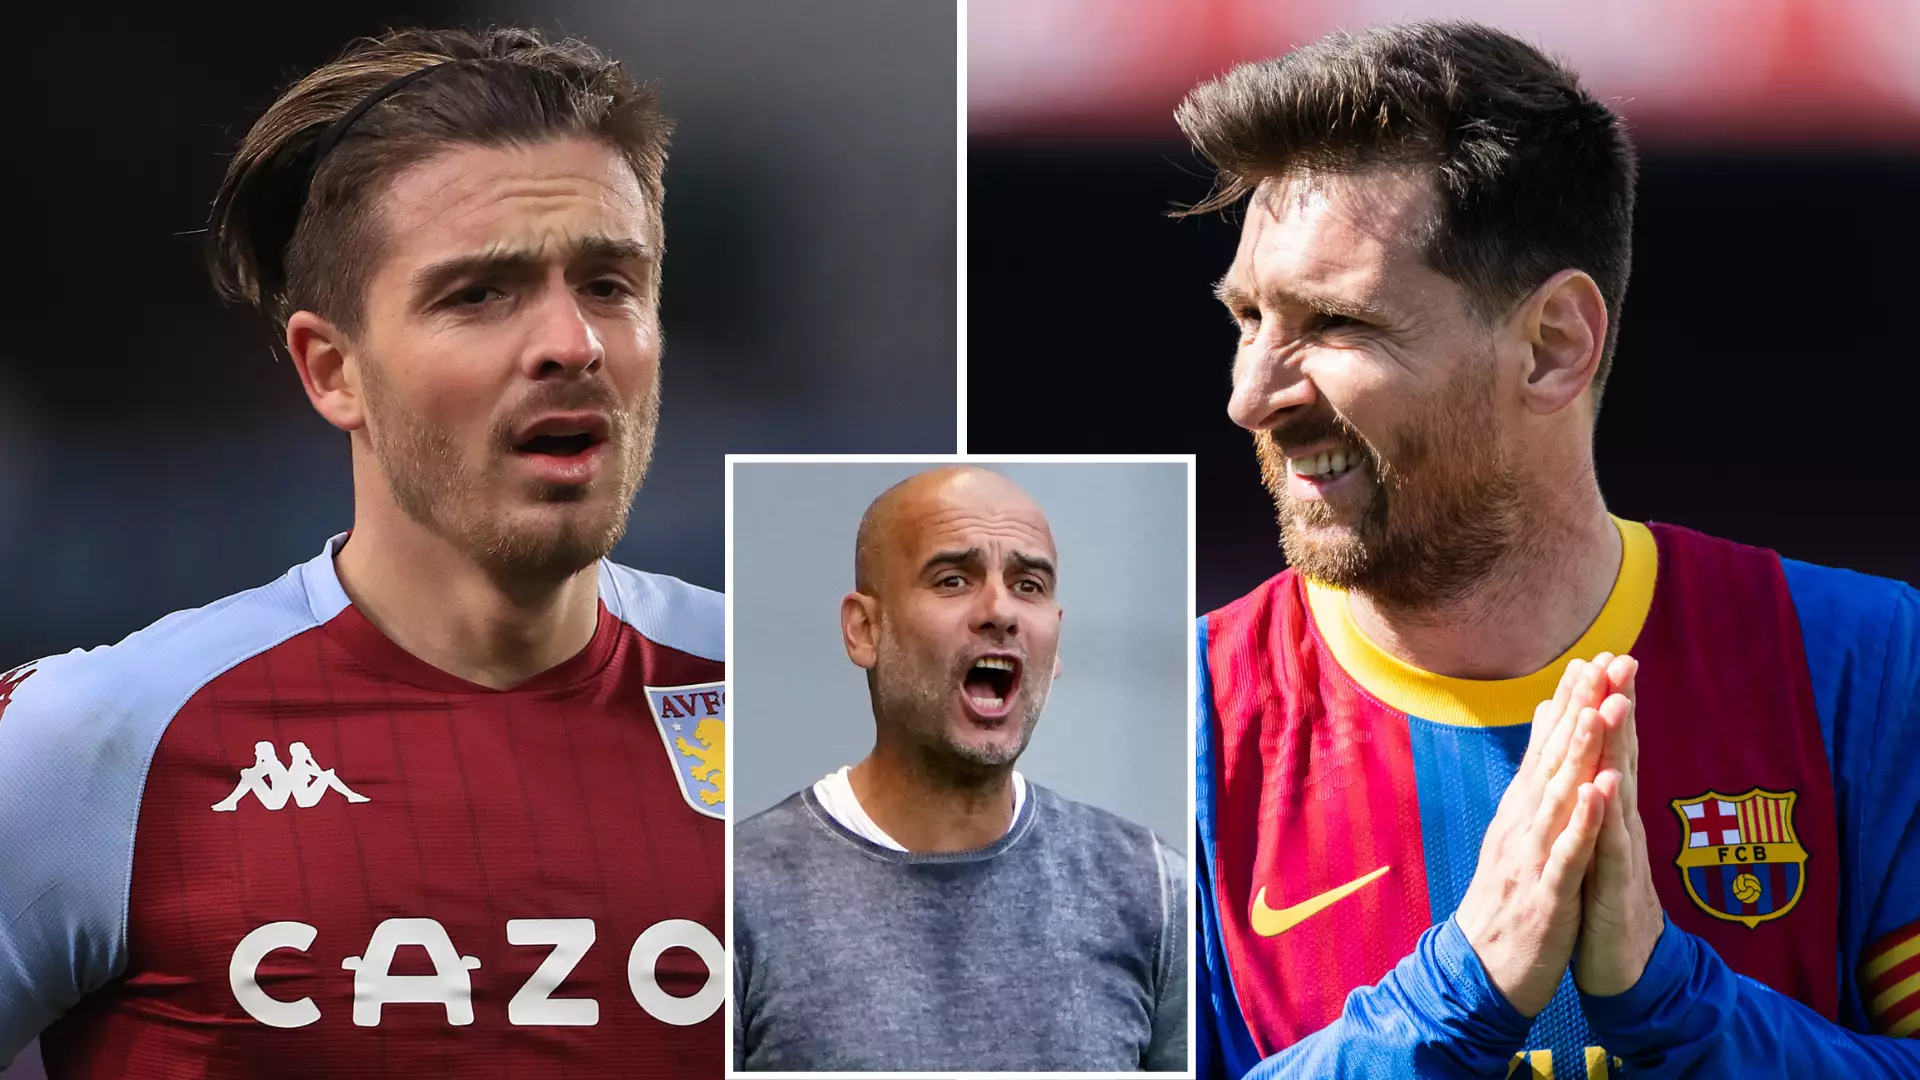 Jack Grealish Is A 'World-Class Player' And Compared To Lionel Messi Amid Manchester City Transfer Interest